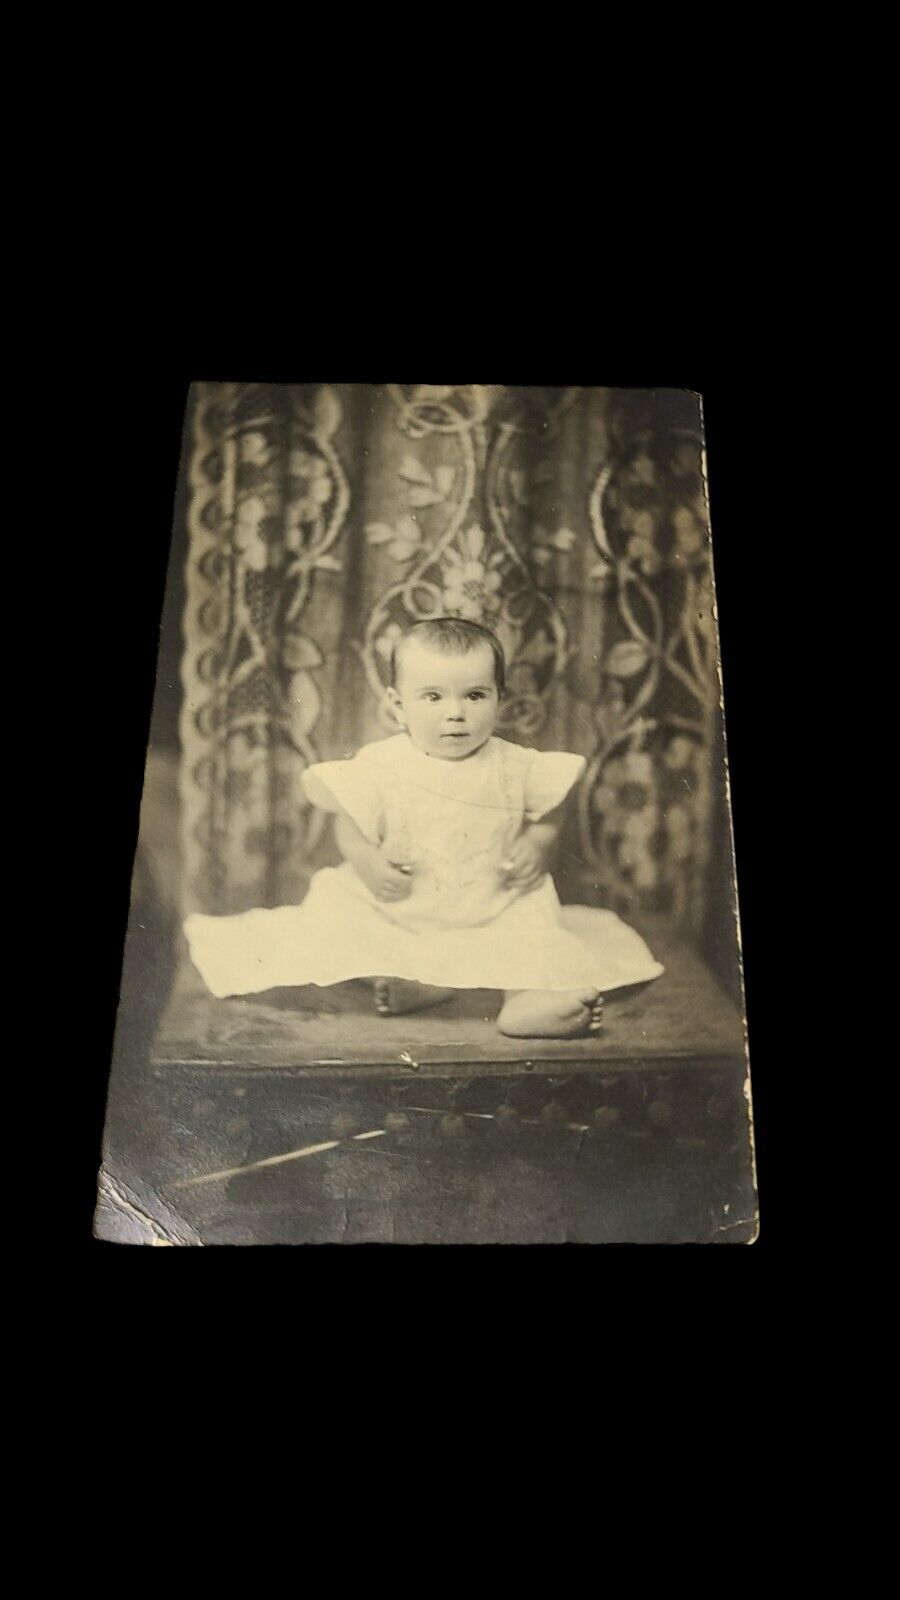 RPPC Baby Child In White Dress Vintage Antique Real Photo Postcard